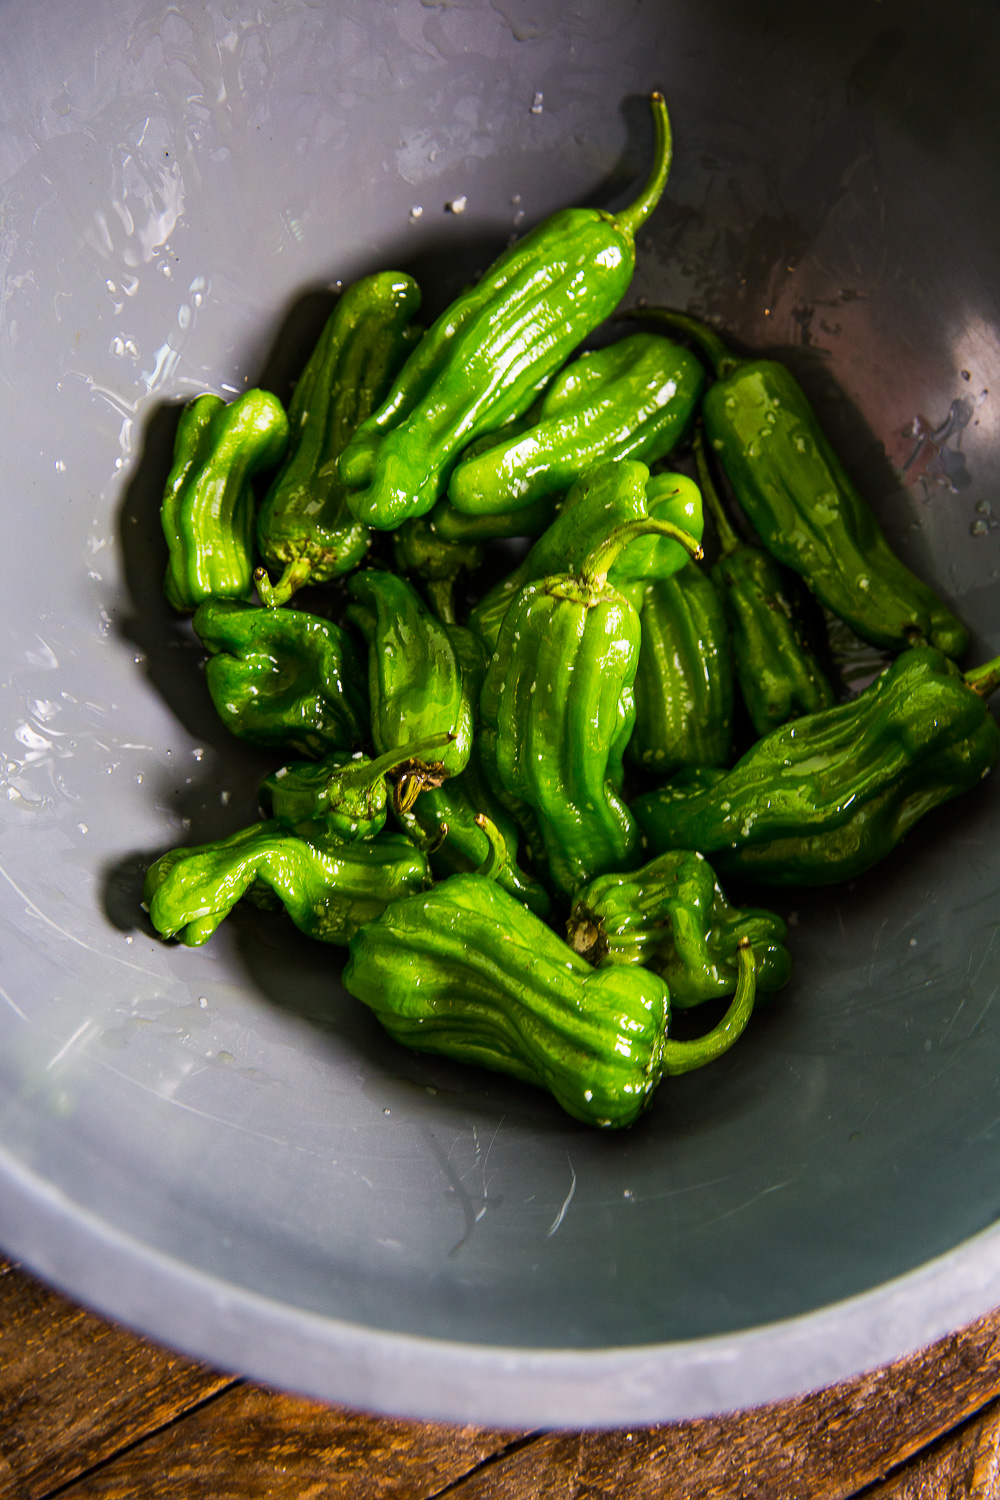 How to make shishito peppers as an appetizer at home